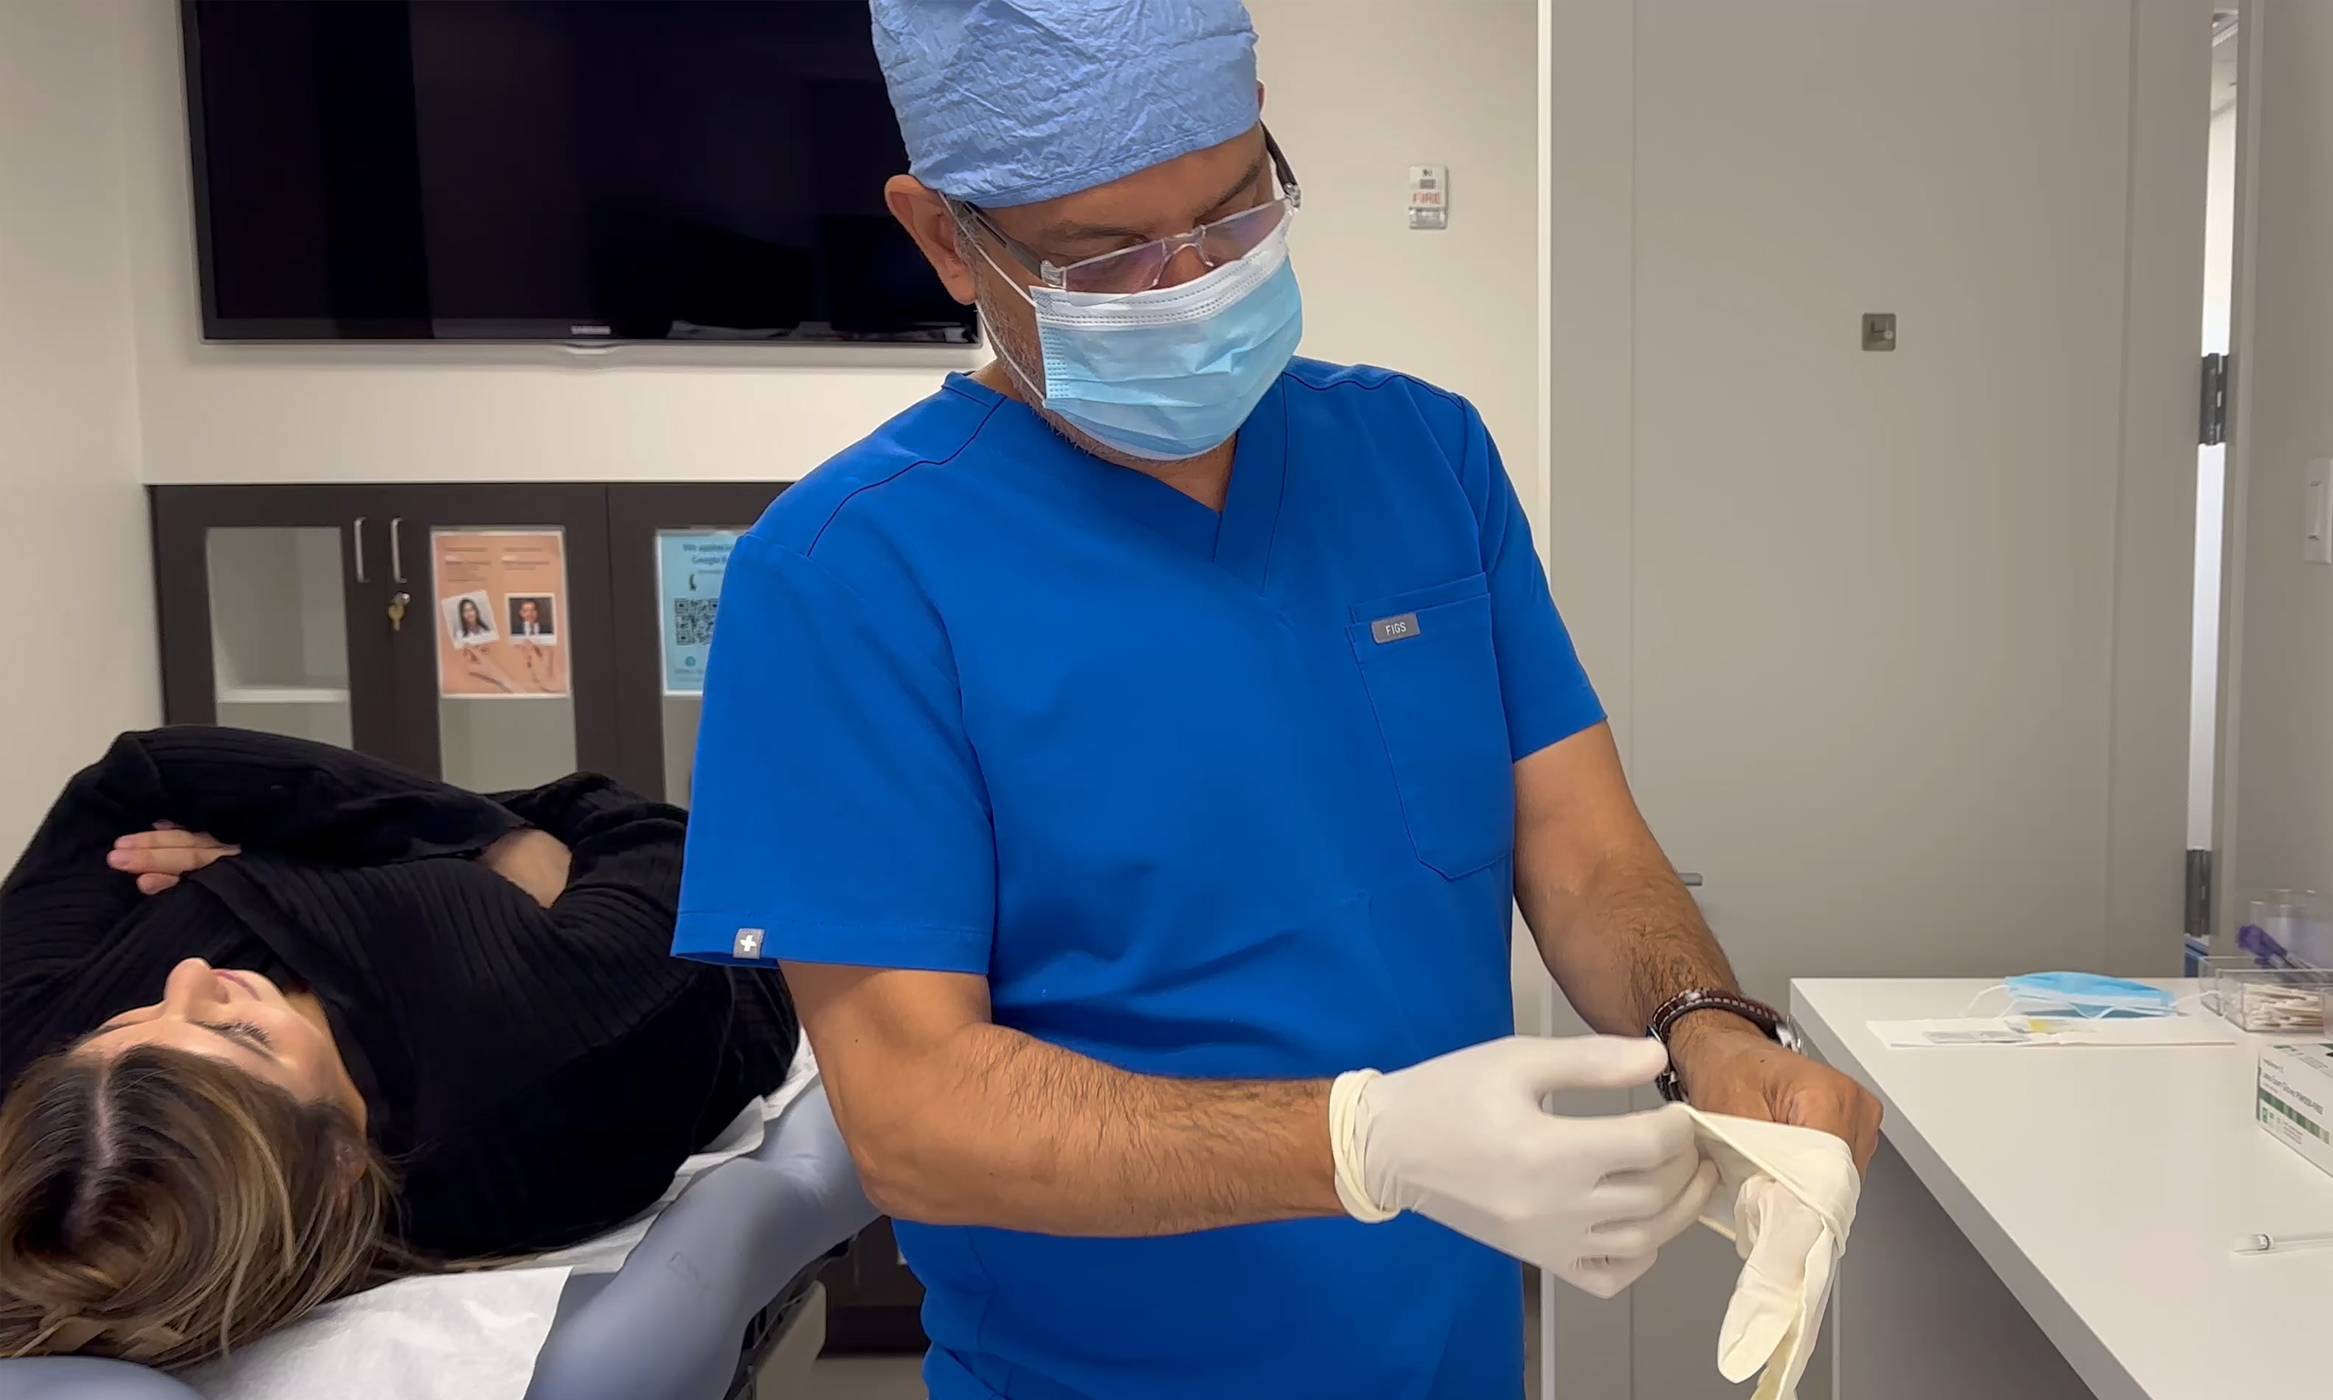 Dr. Zack Charkawi performing a hair restoration treatment using his innovative technique to maximize hair growth results and minimize pain.